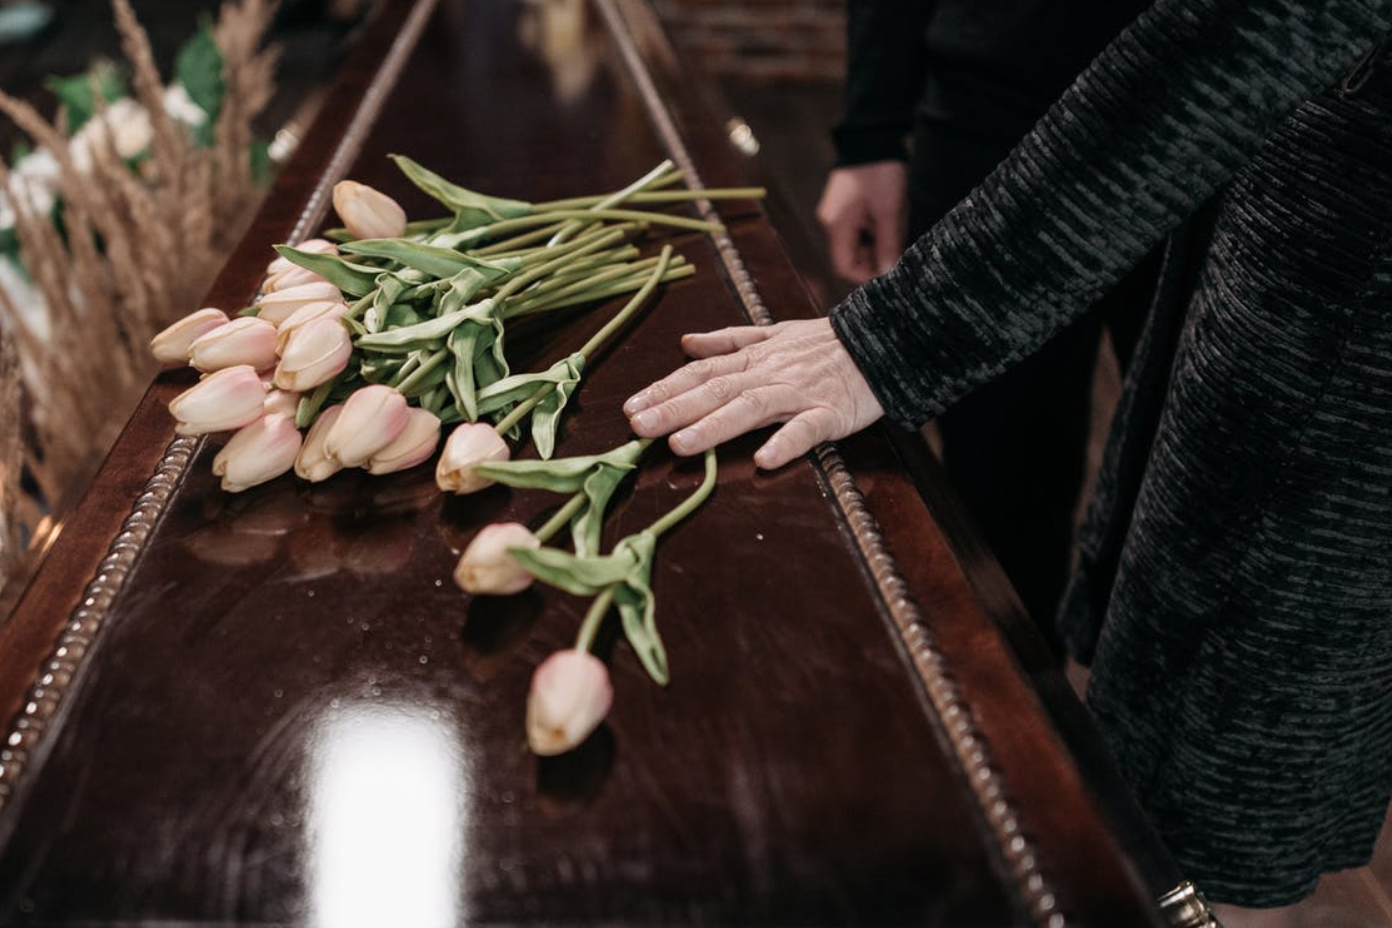 Person touching casket with roses on it; image by Pavel Danilyuk, via Unsplash.com.